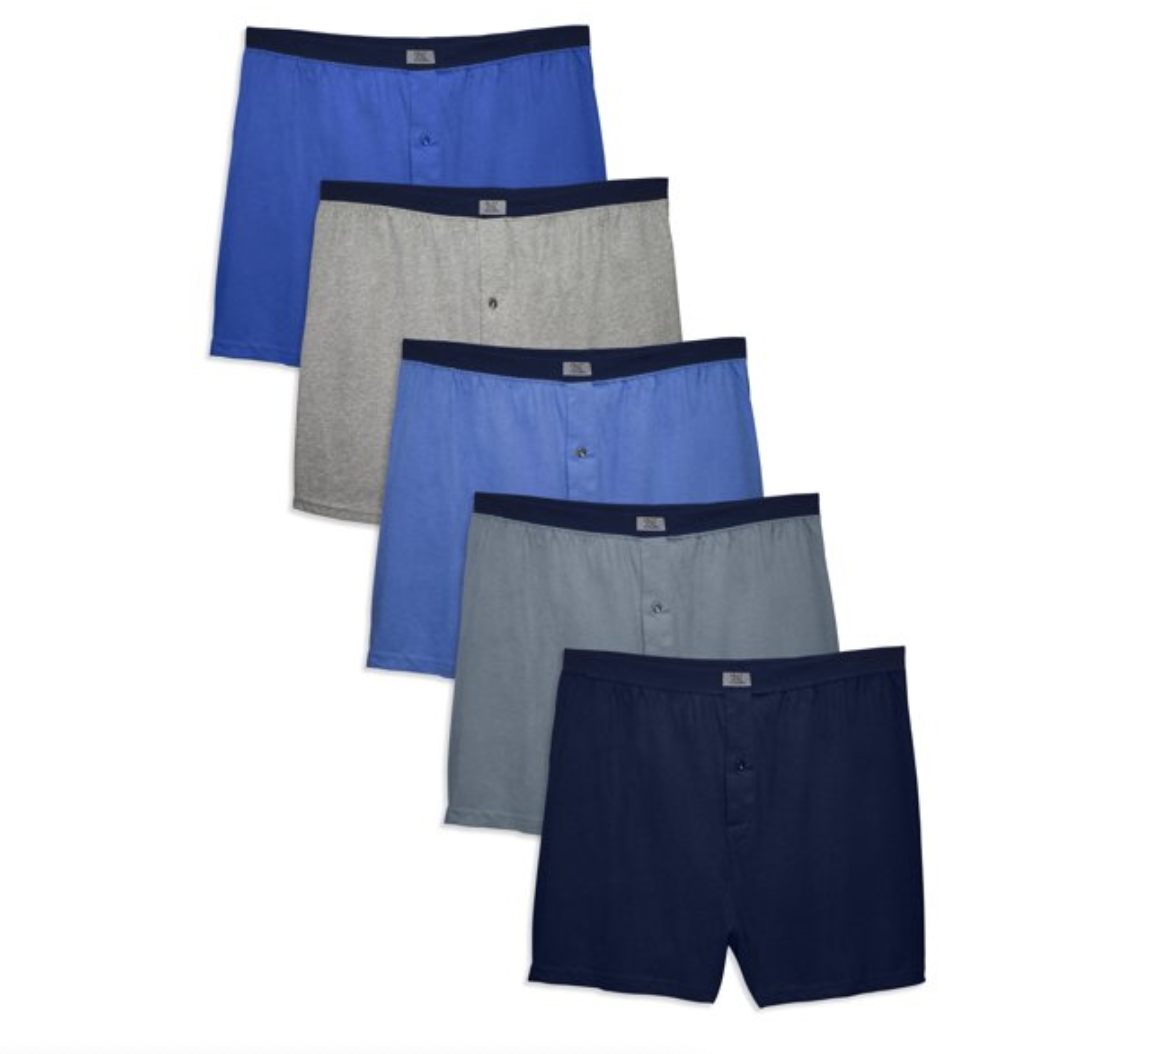 5 Pack M Men's Assorted Knit Boxers, L (Fruit of the Loom )